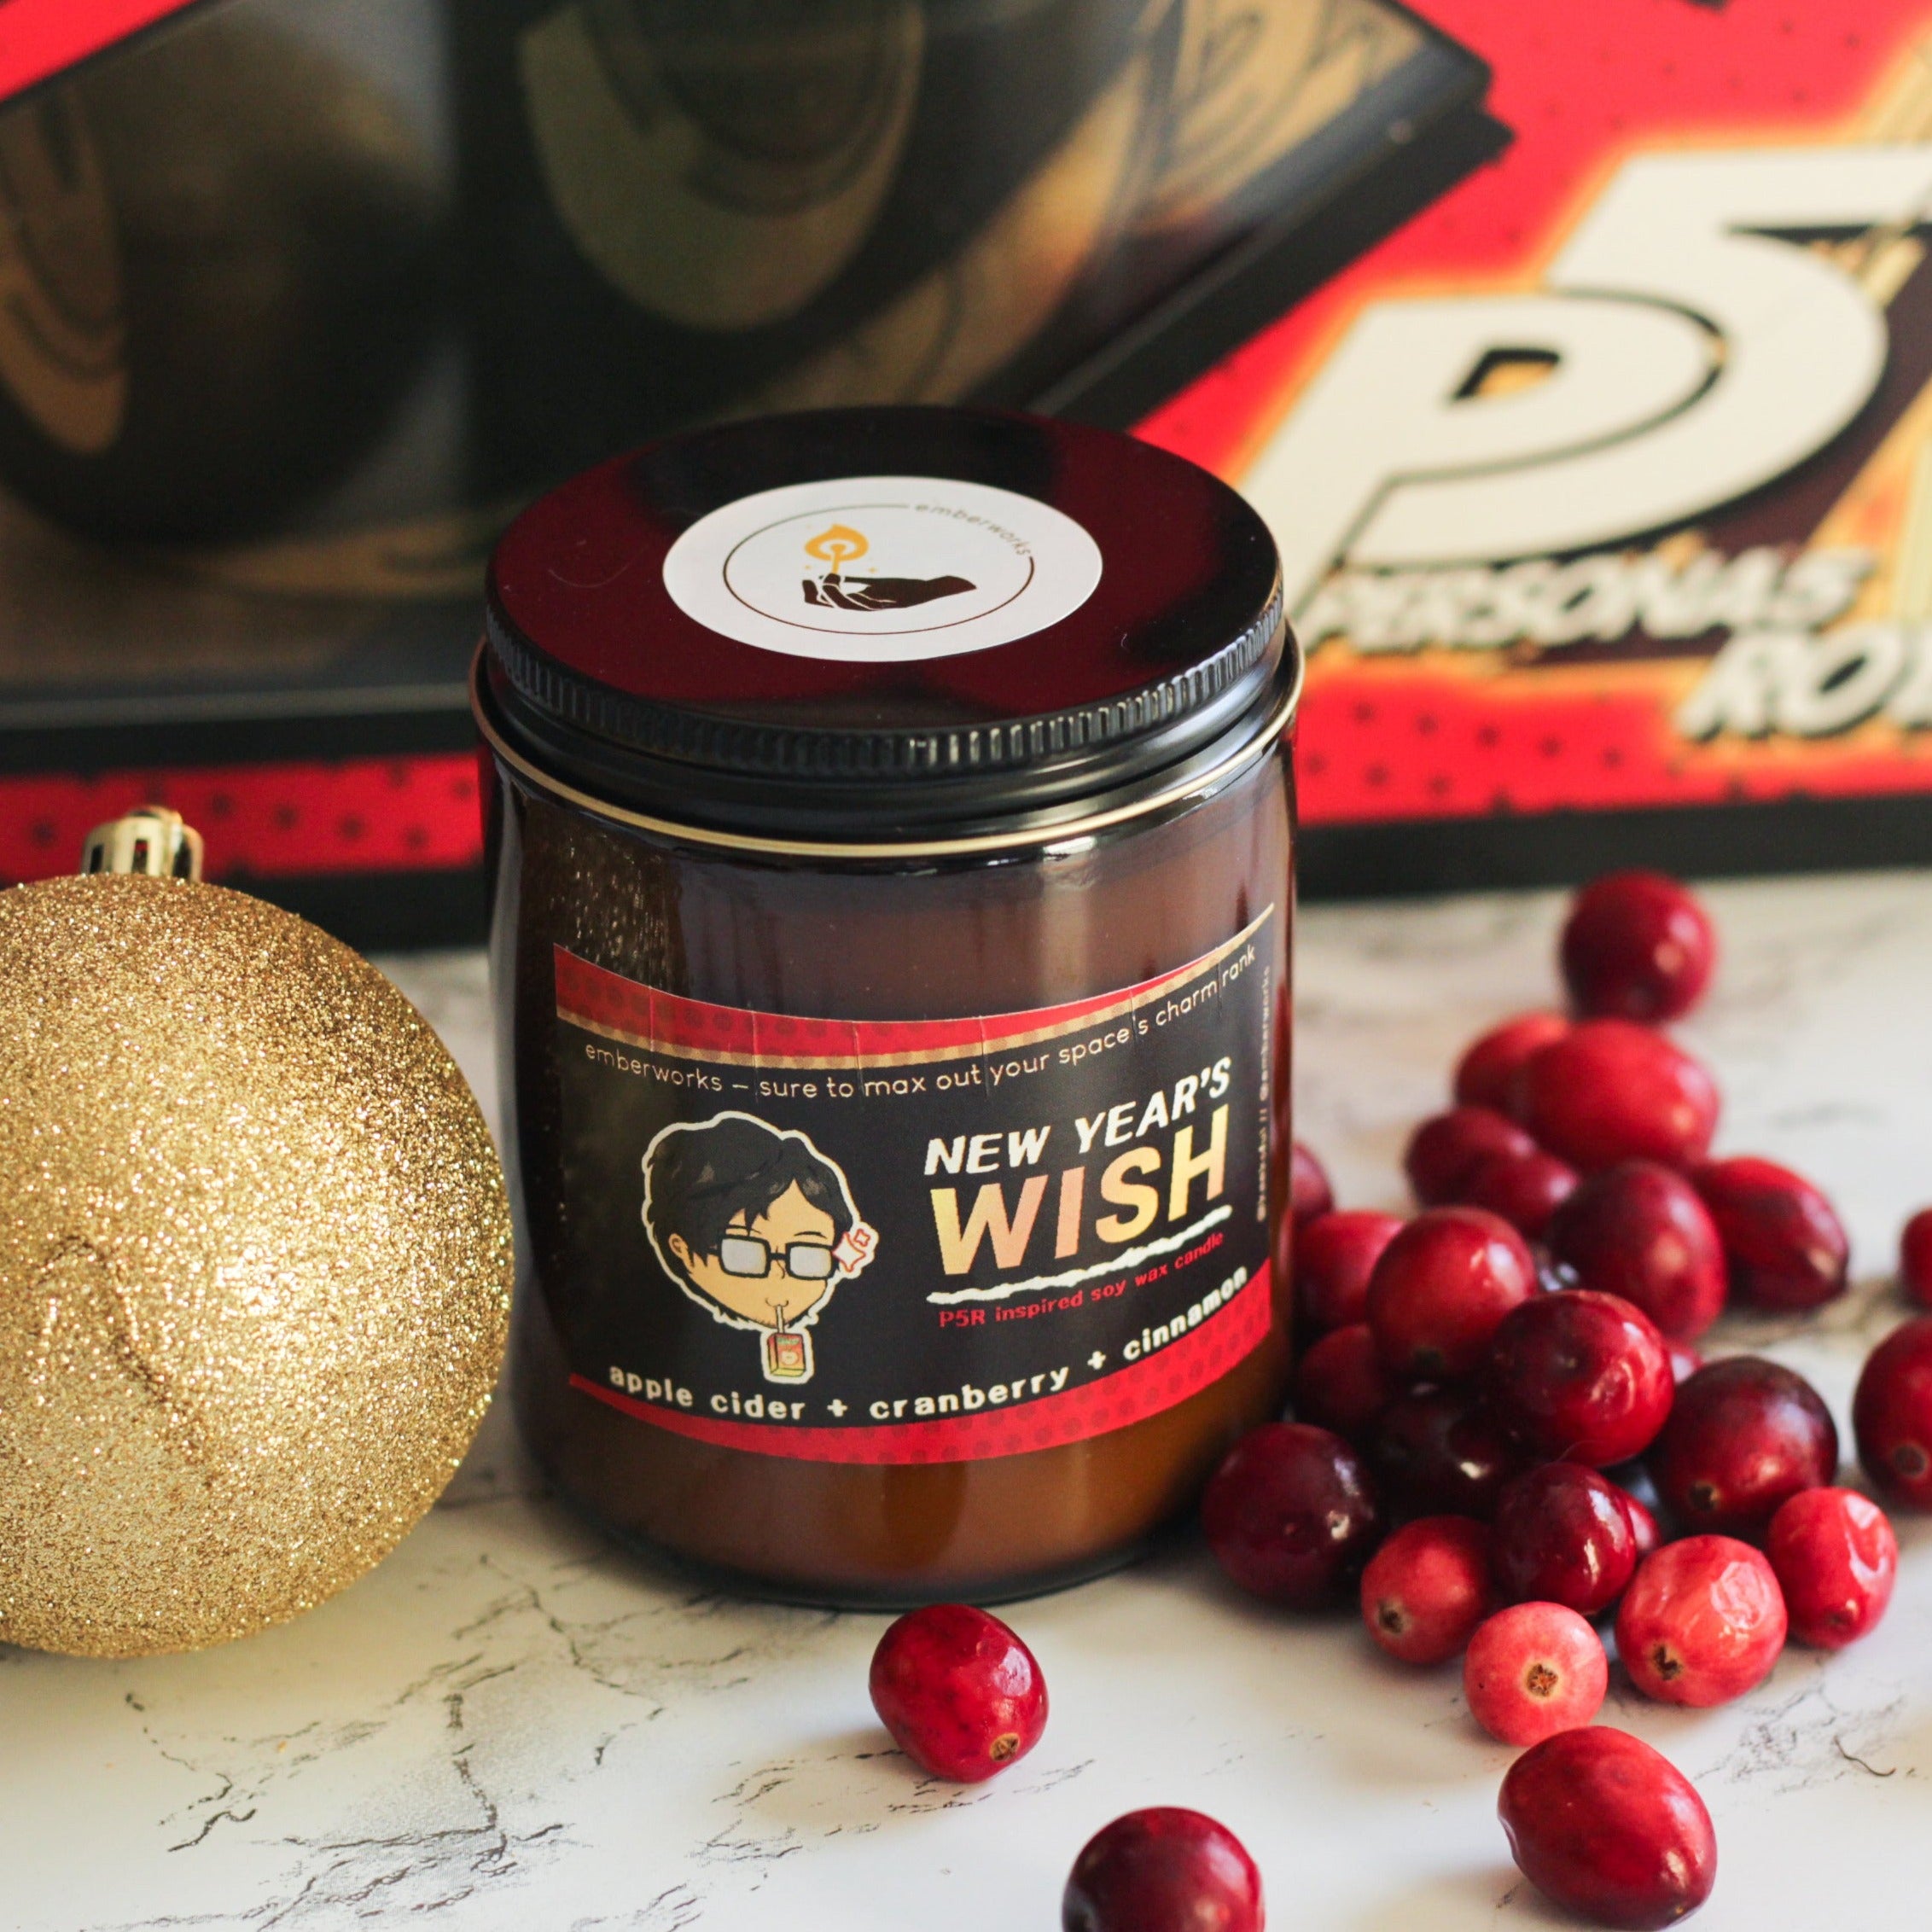 New Year's Wish - Persona 5 Royal Inspired Candle